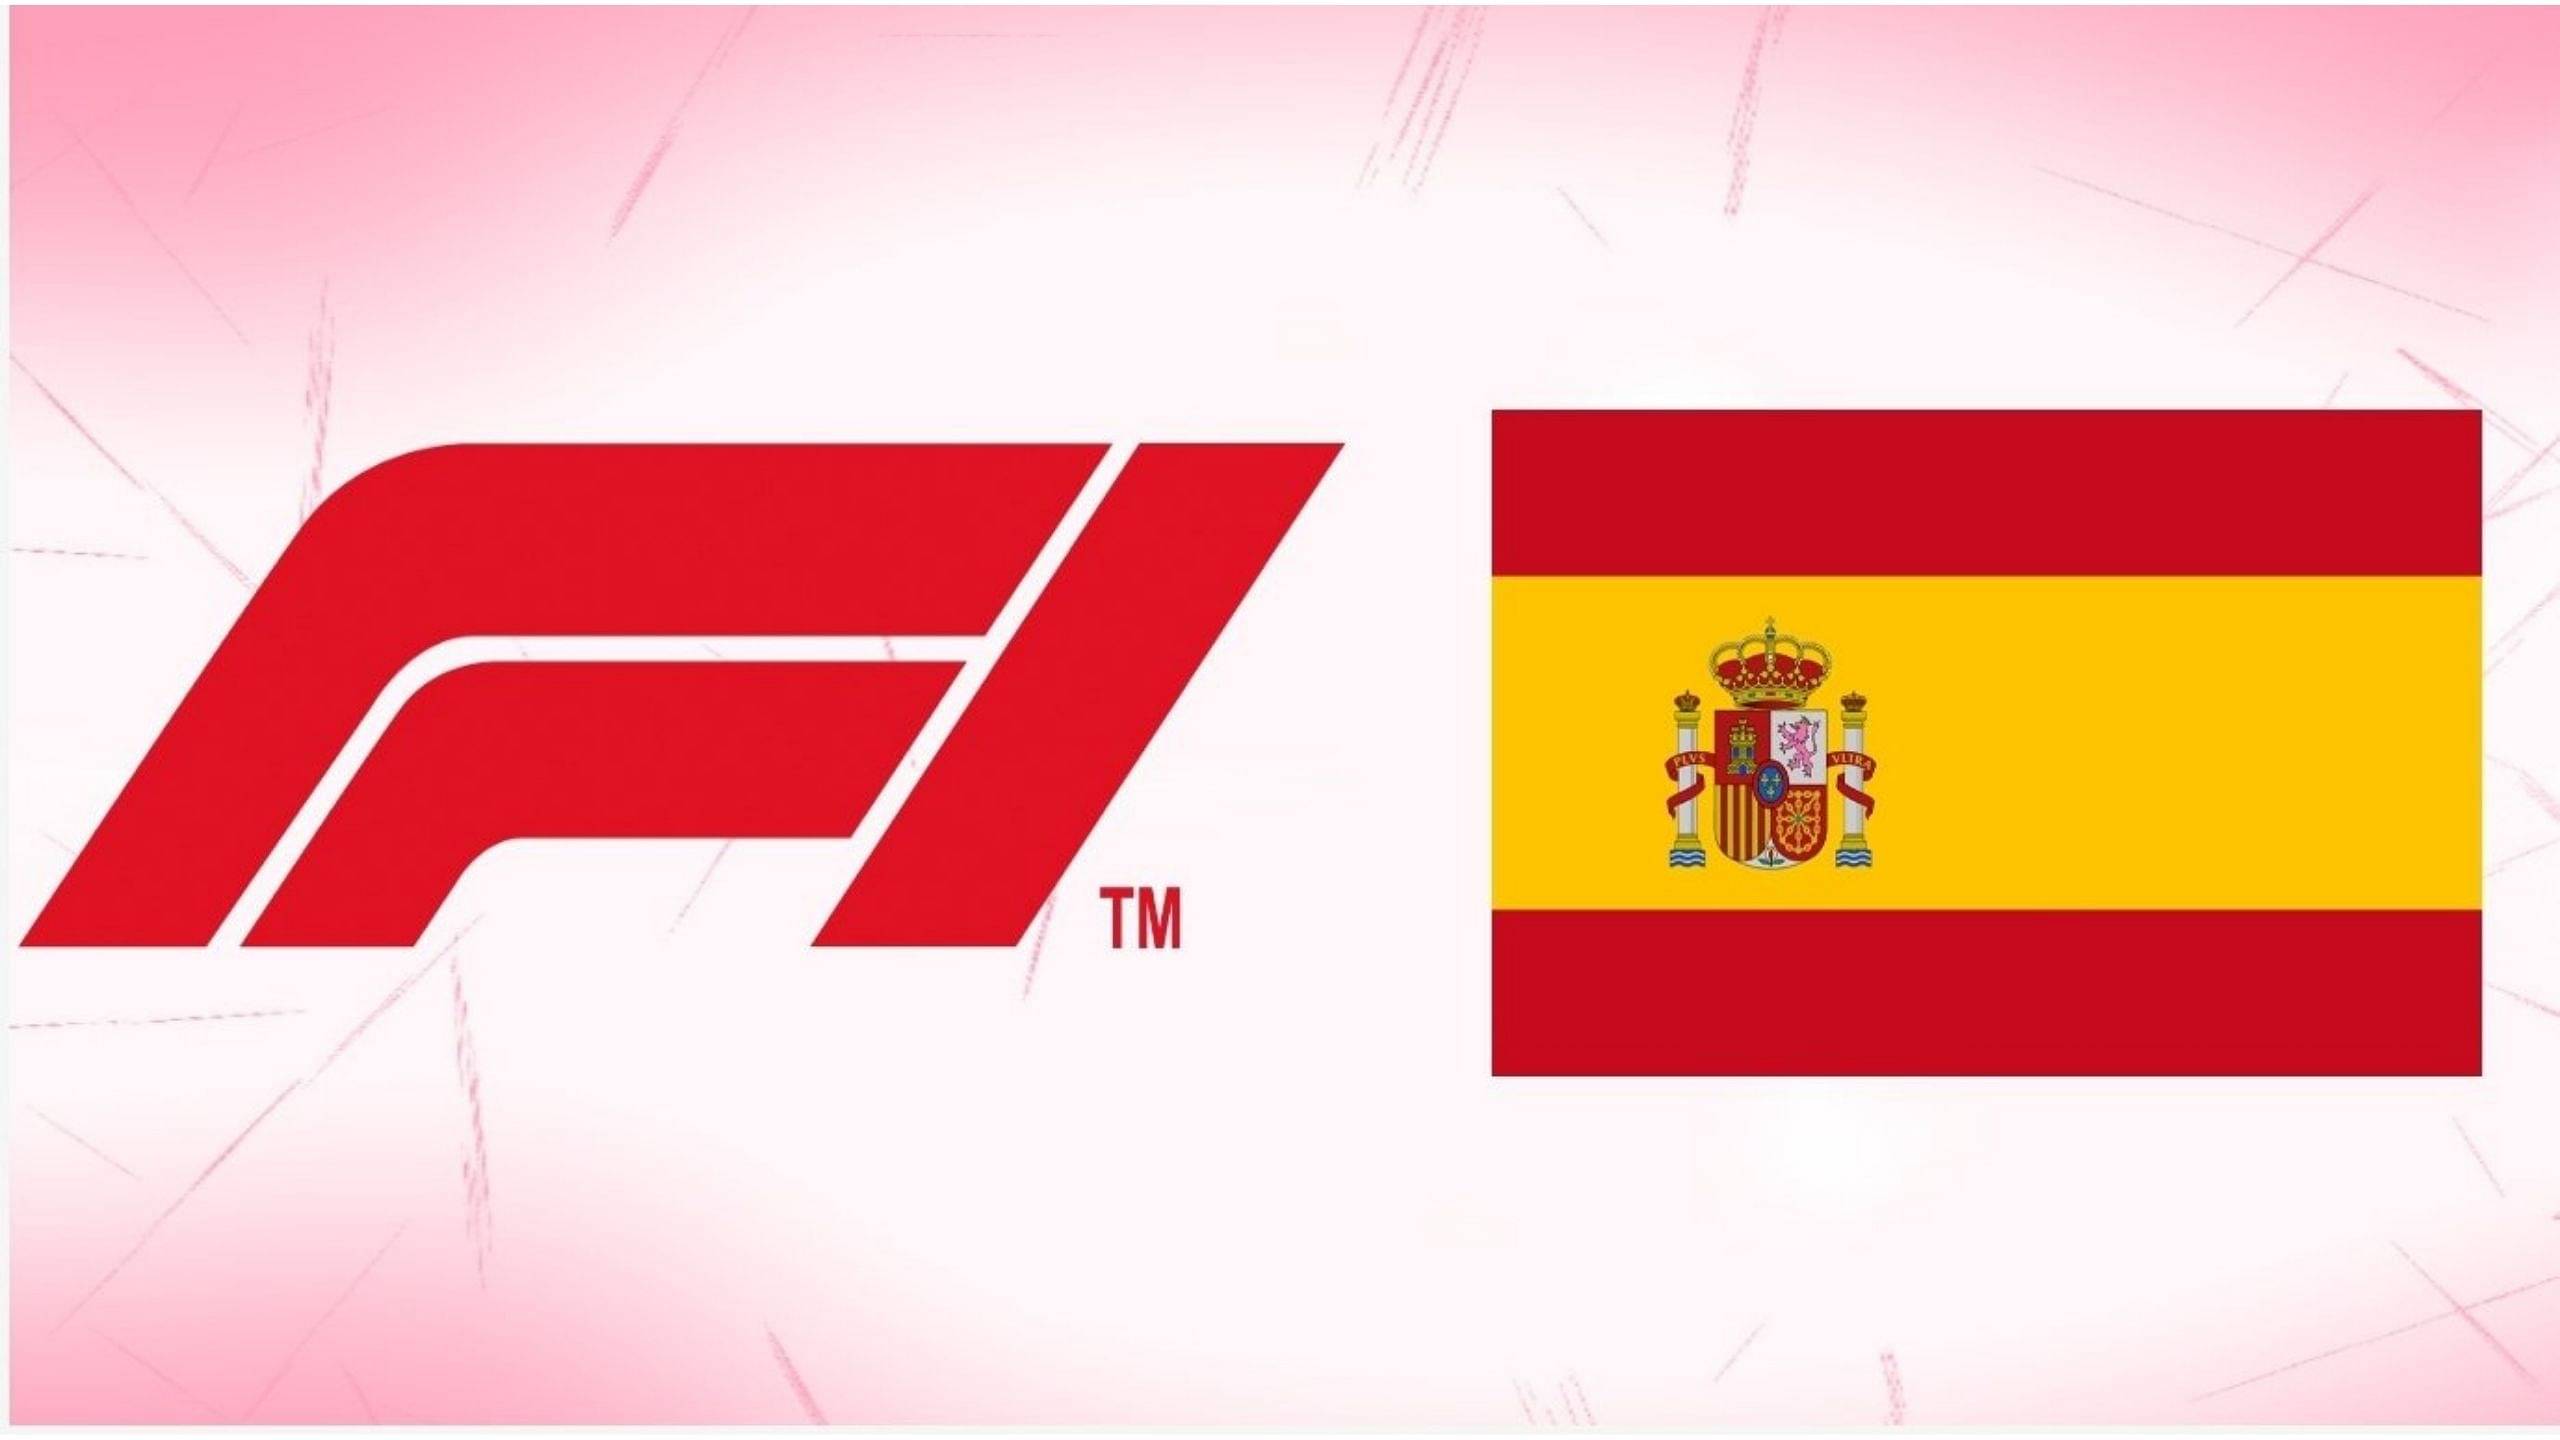 "Jobs and wealth that is 10 times higher than the contribution made by the Catalan government" - Spanish GP given green light for F1 2021 Calendar